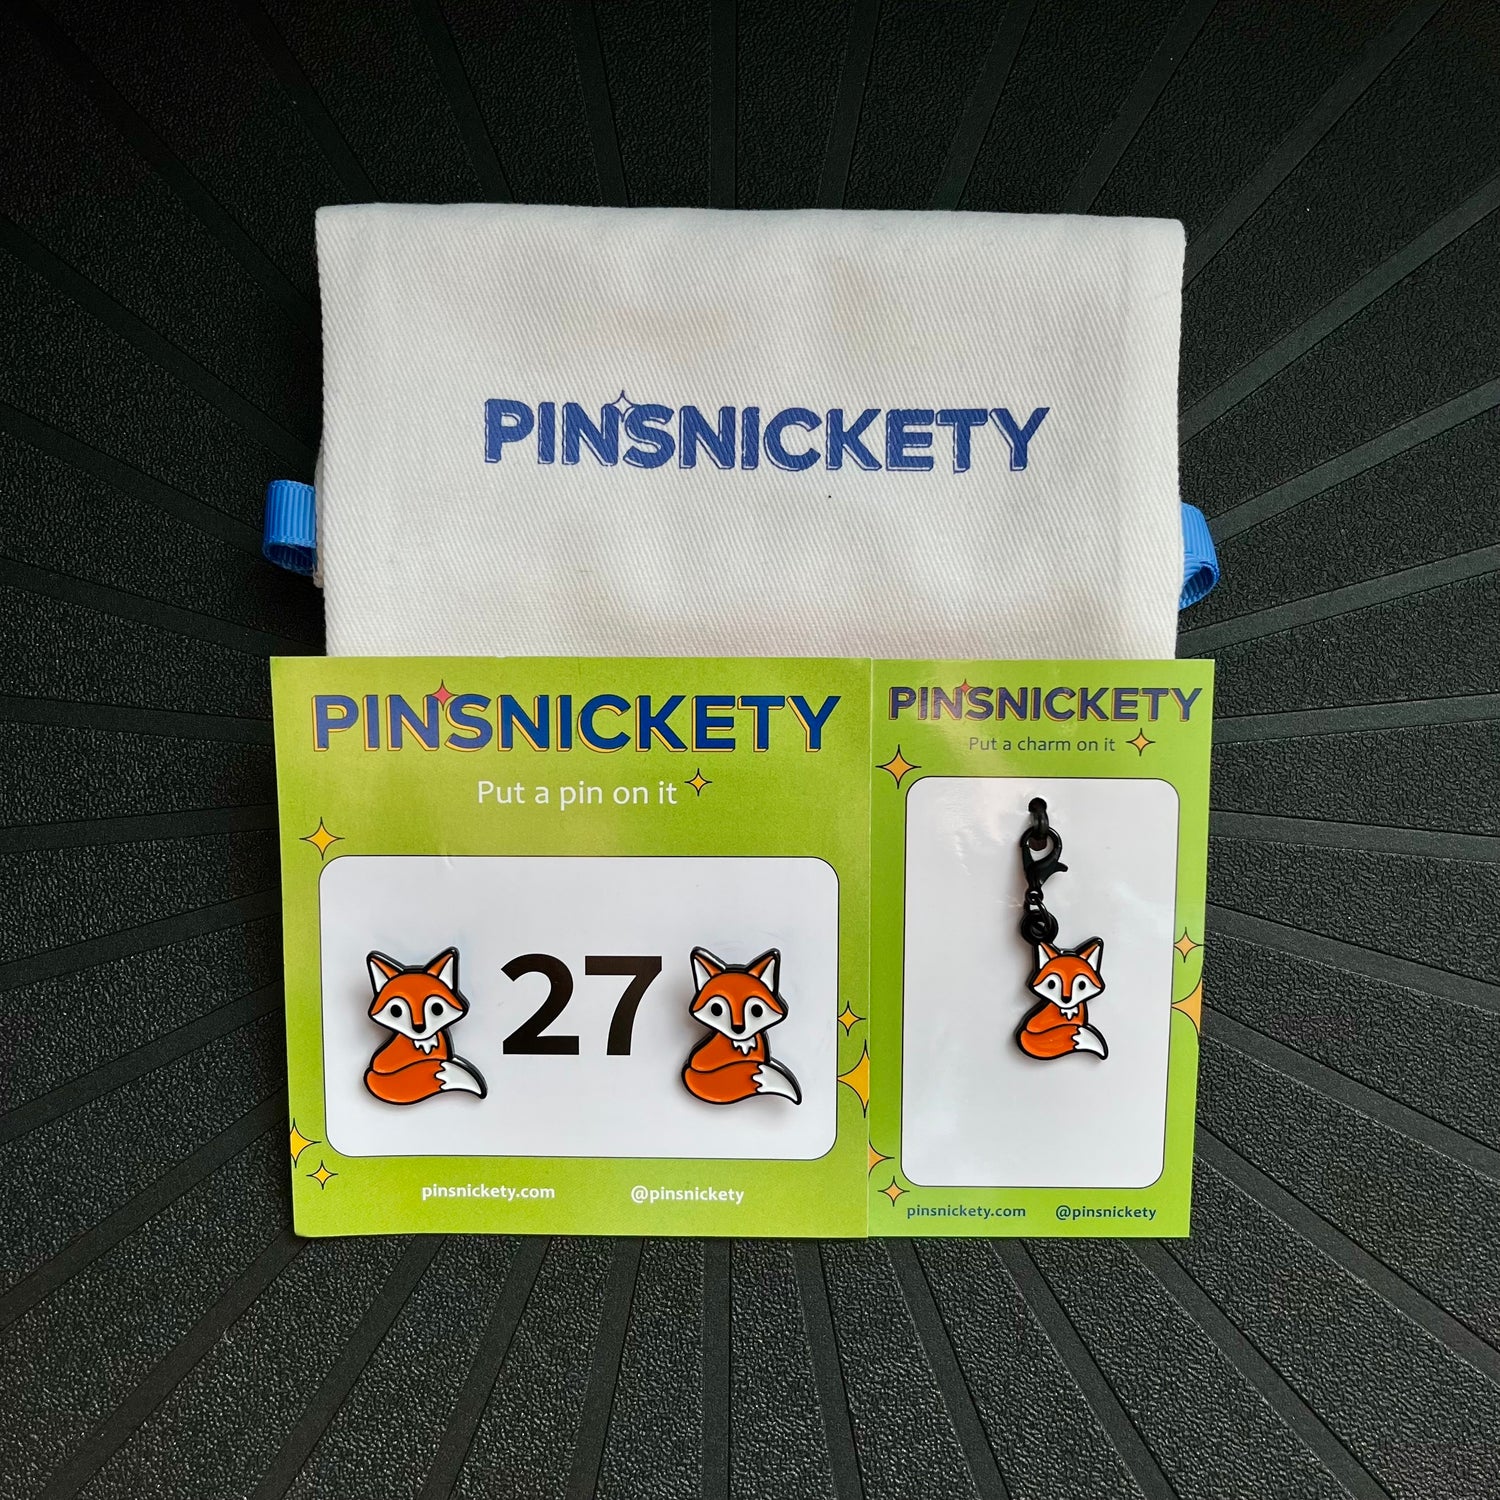 Pinsnickety fox horse show number pins and braid and bridle charm in a matching set with a Pinsnickety twill storage bag